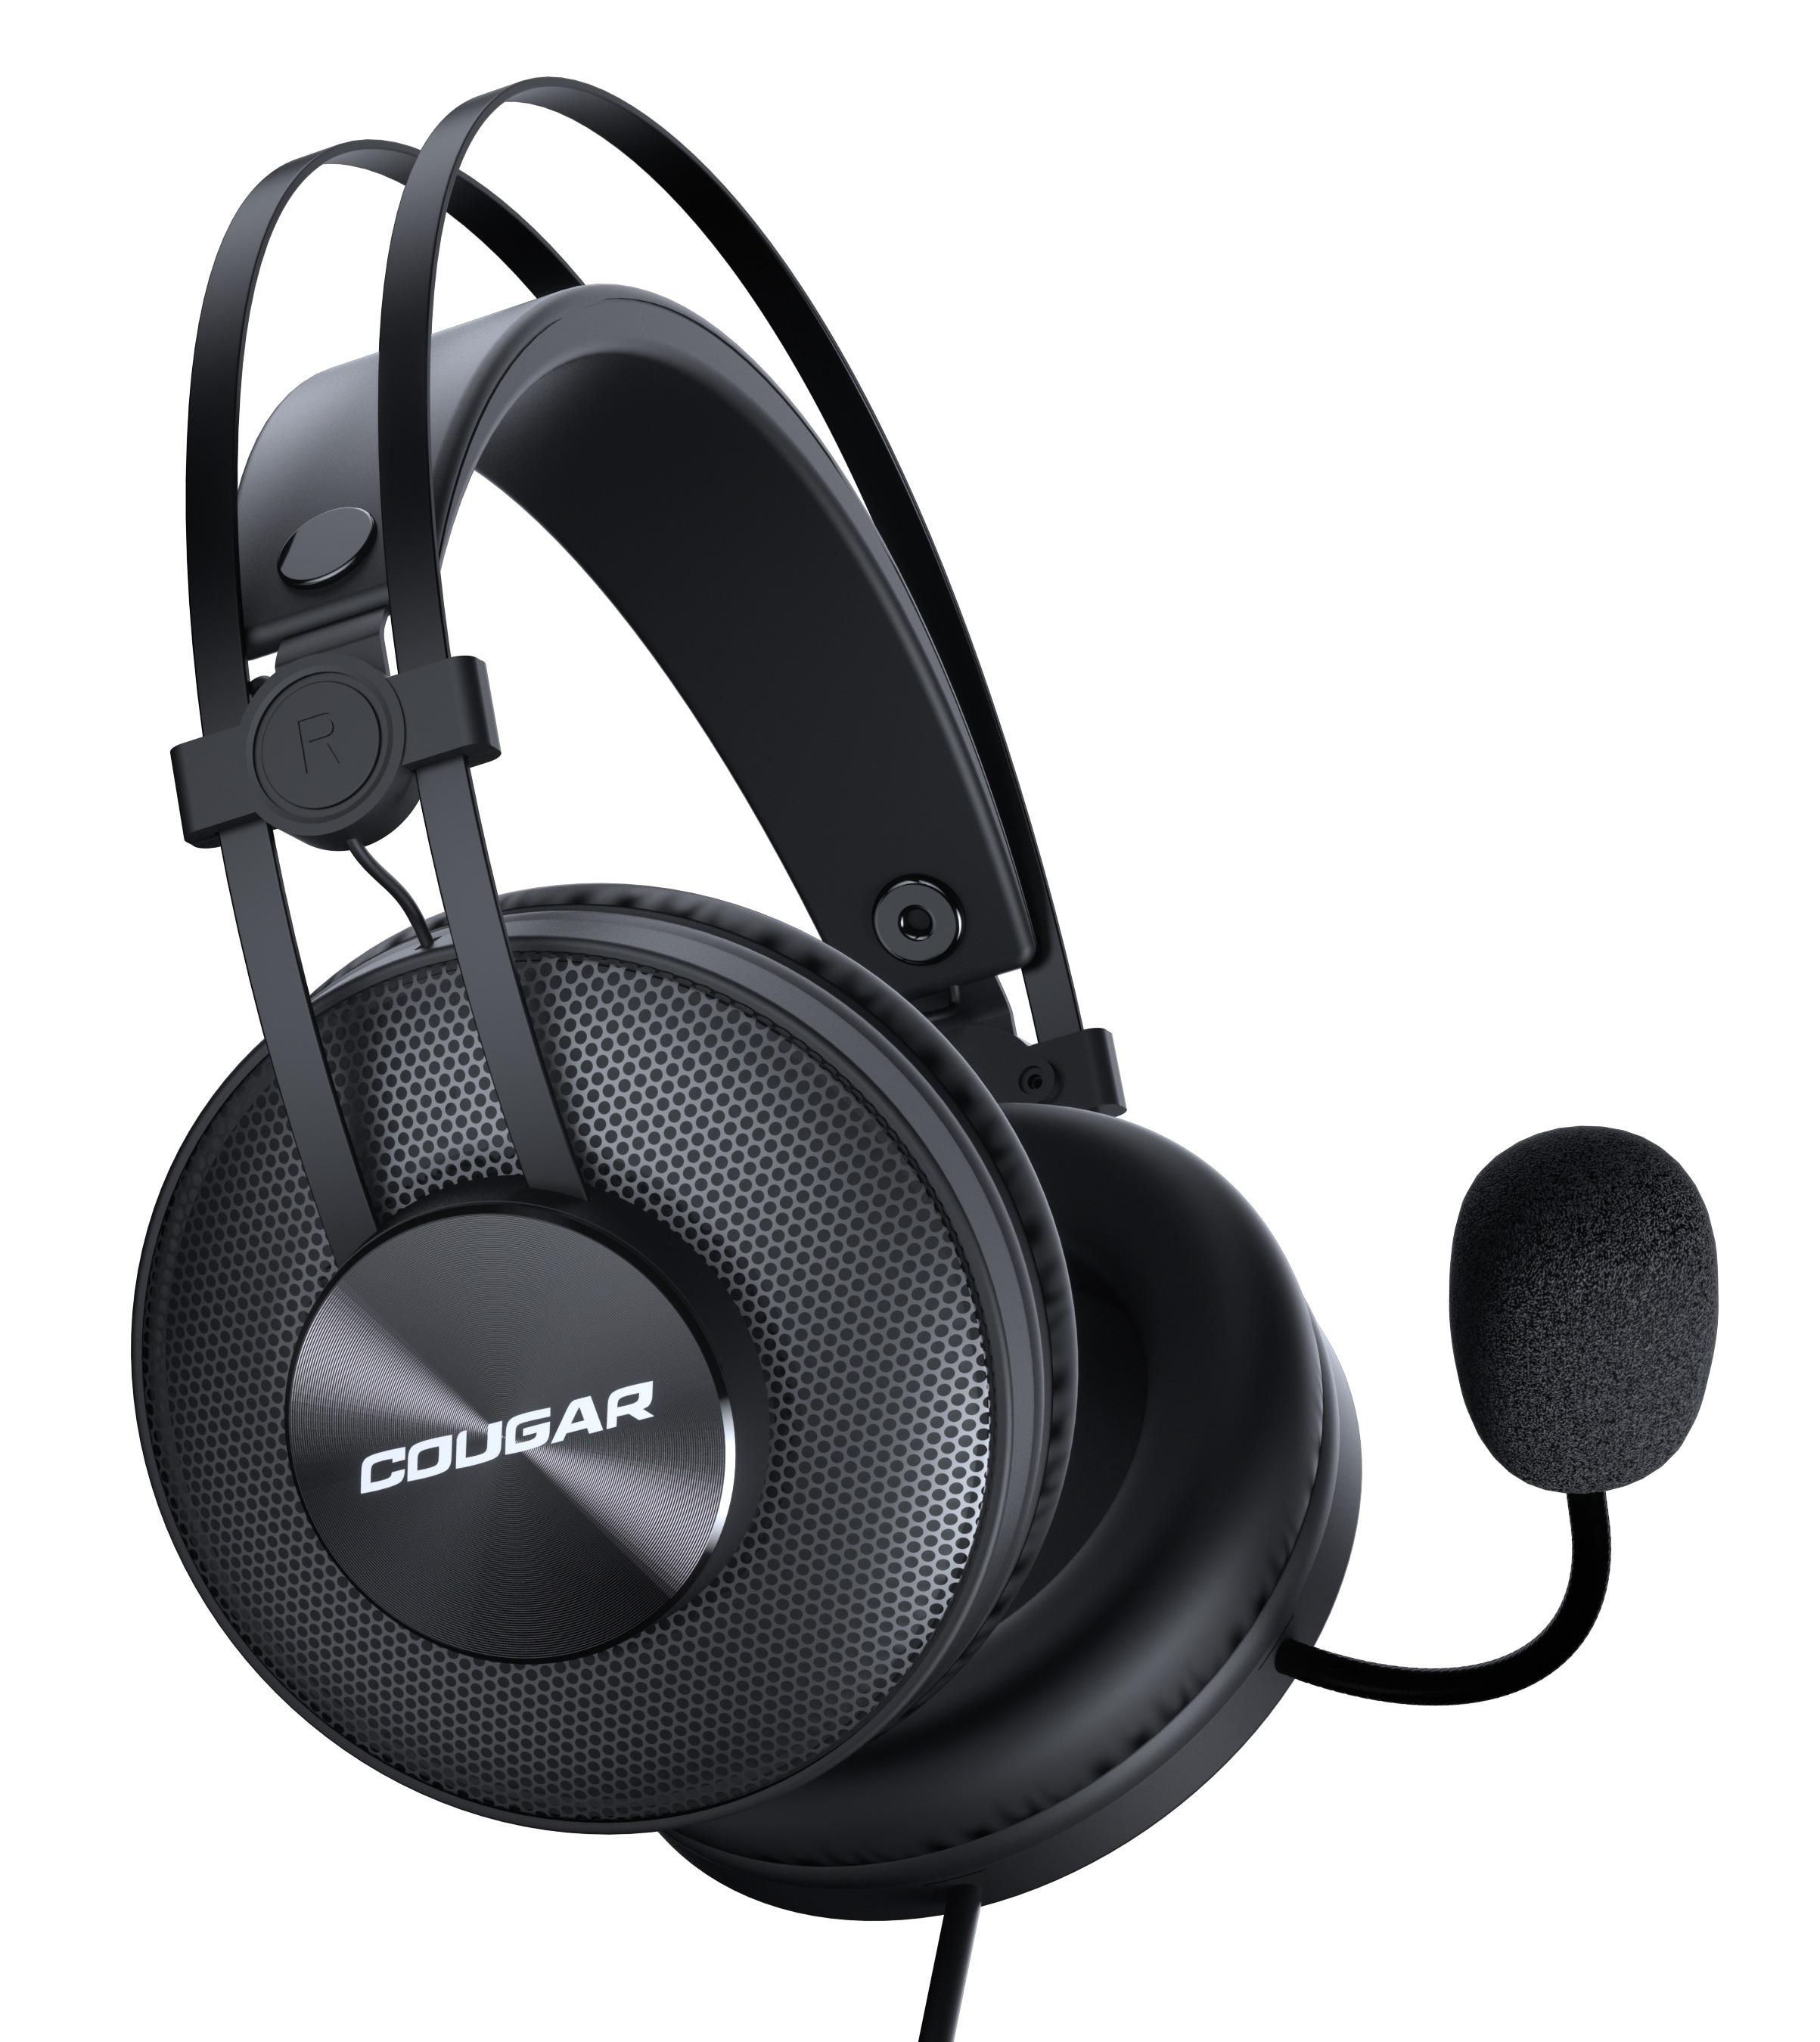 Schwarz Immersa COUGAR Gaming Essential, Headset Over-ear